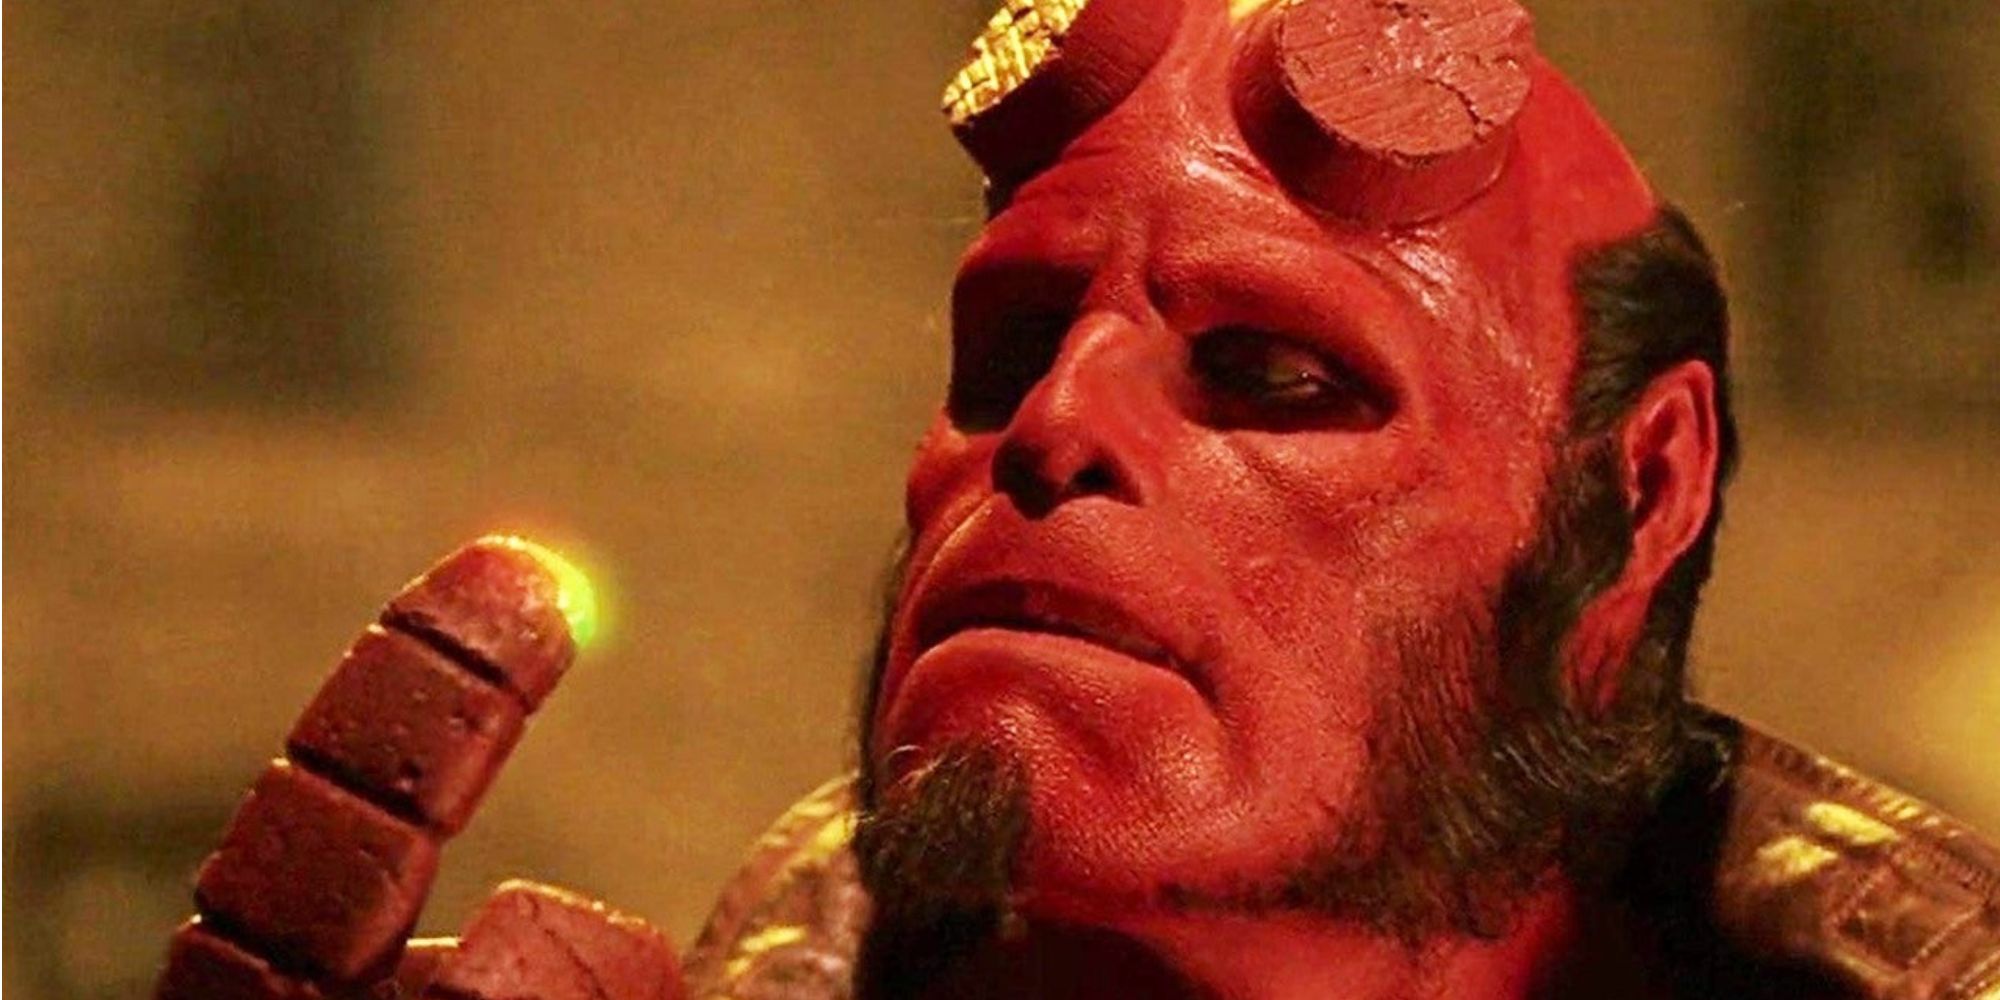 Hellboy is so much better than its modern remake